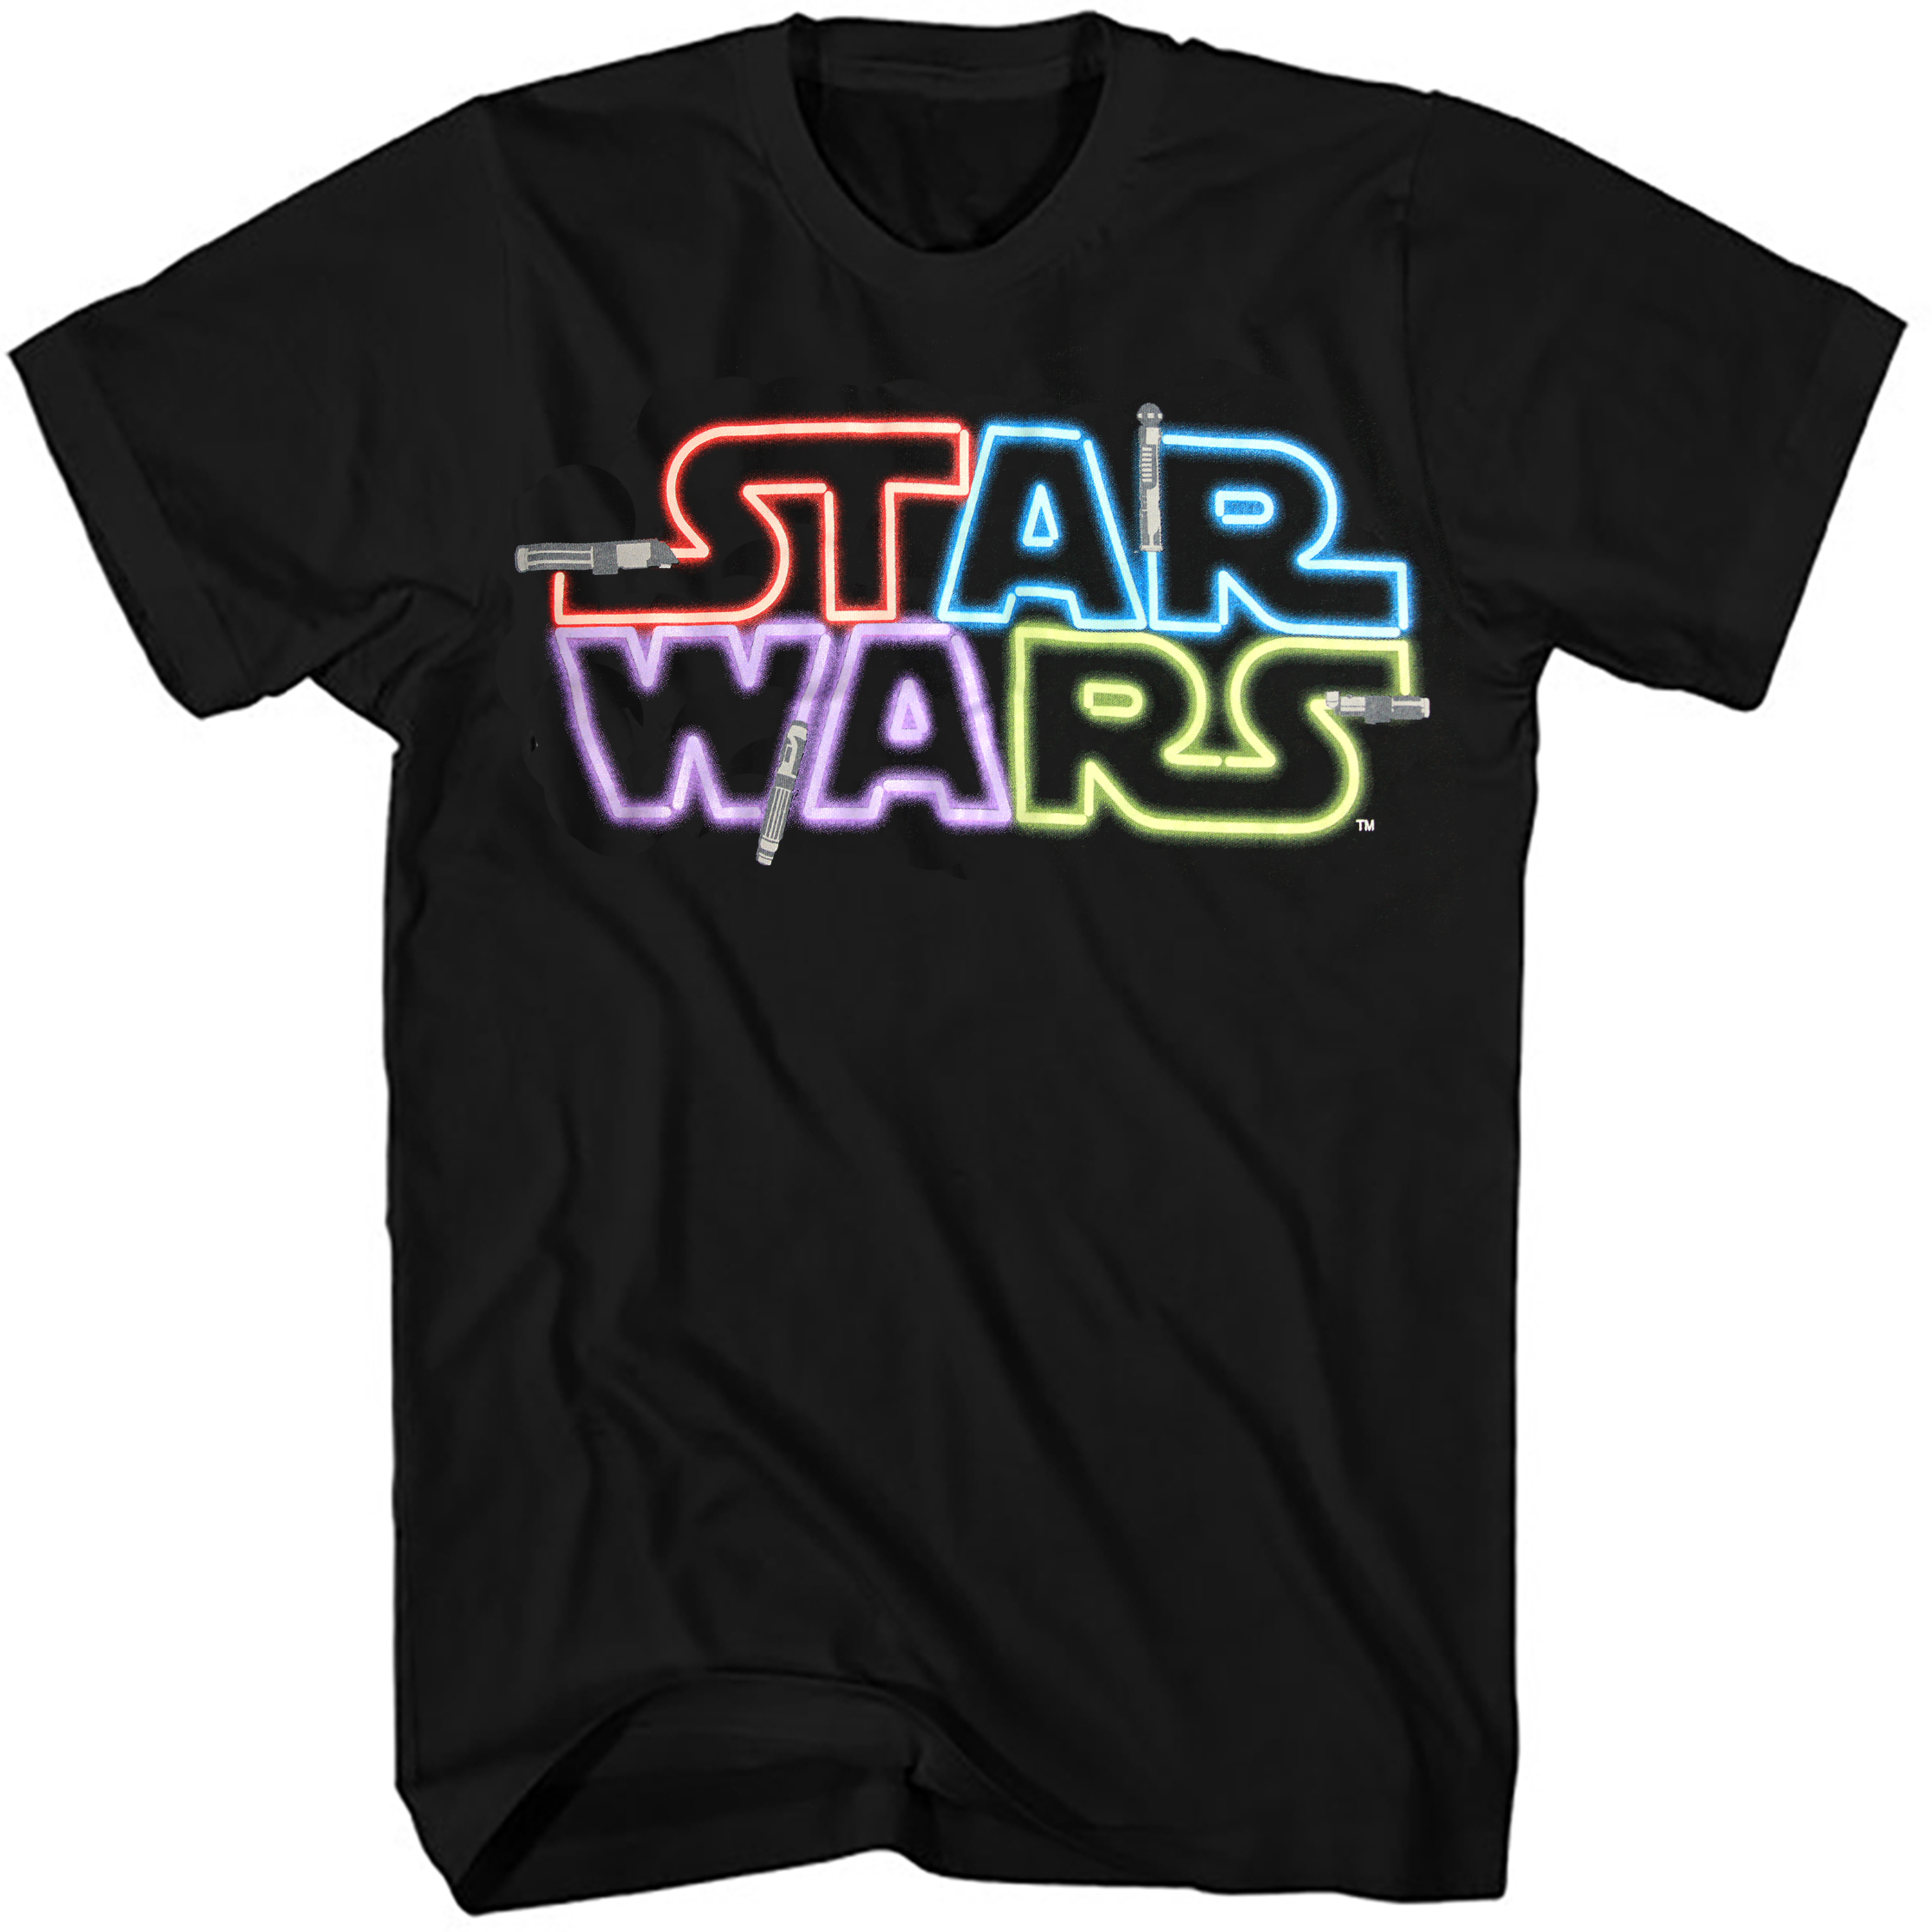 Star Wars T-shirt by clothenvy